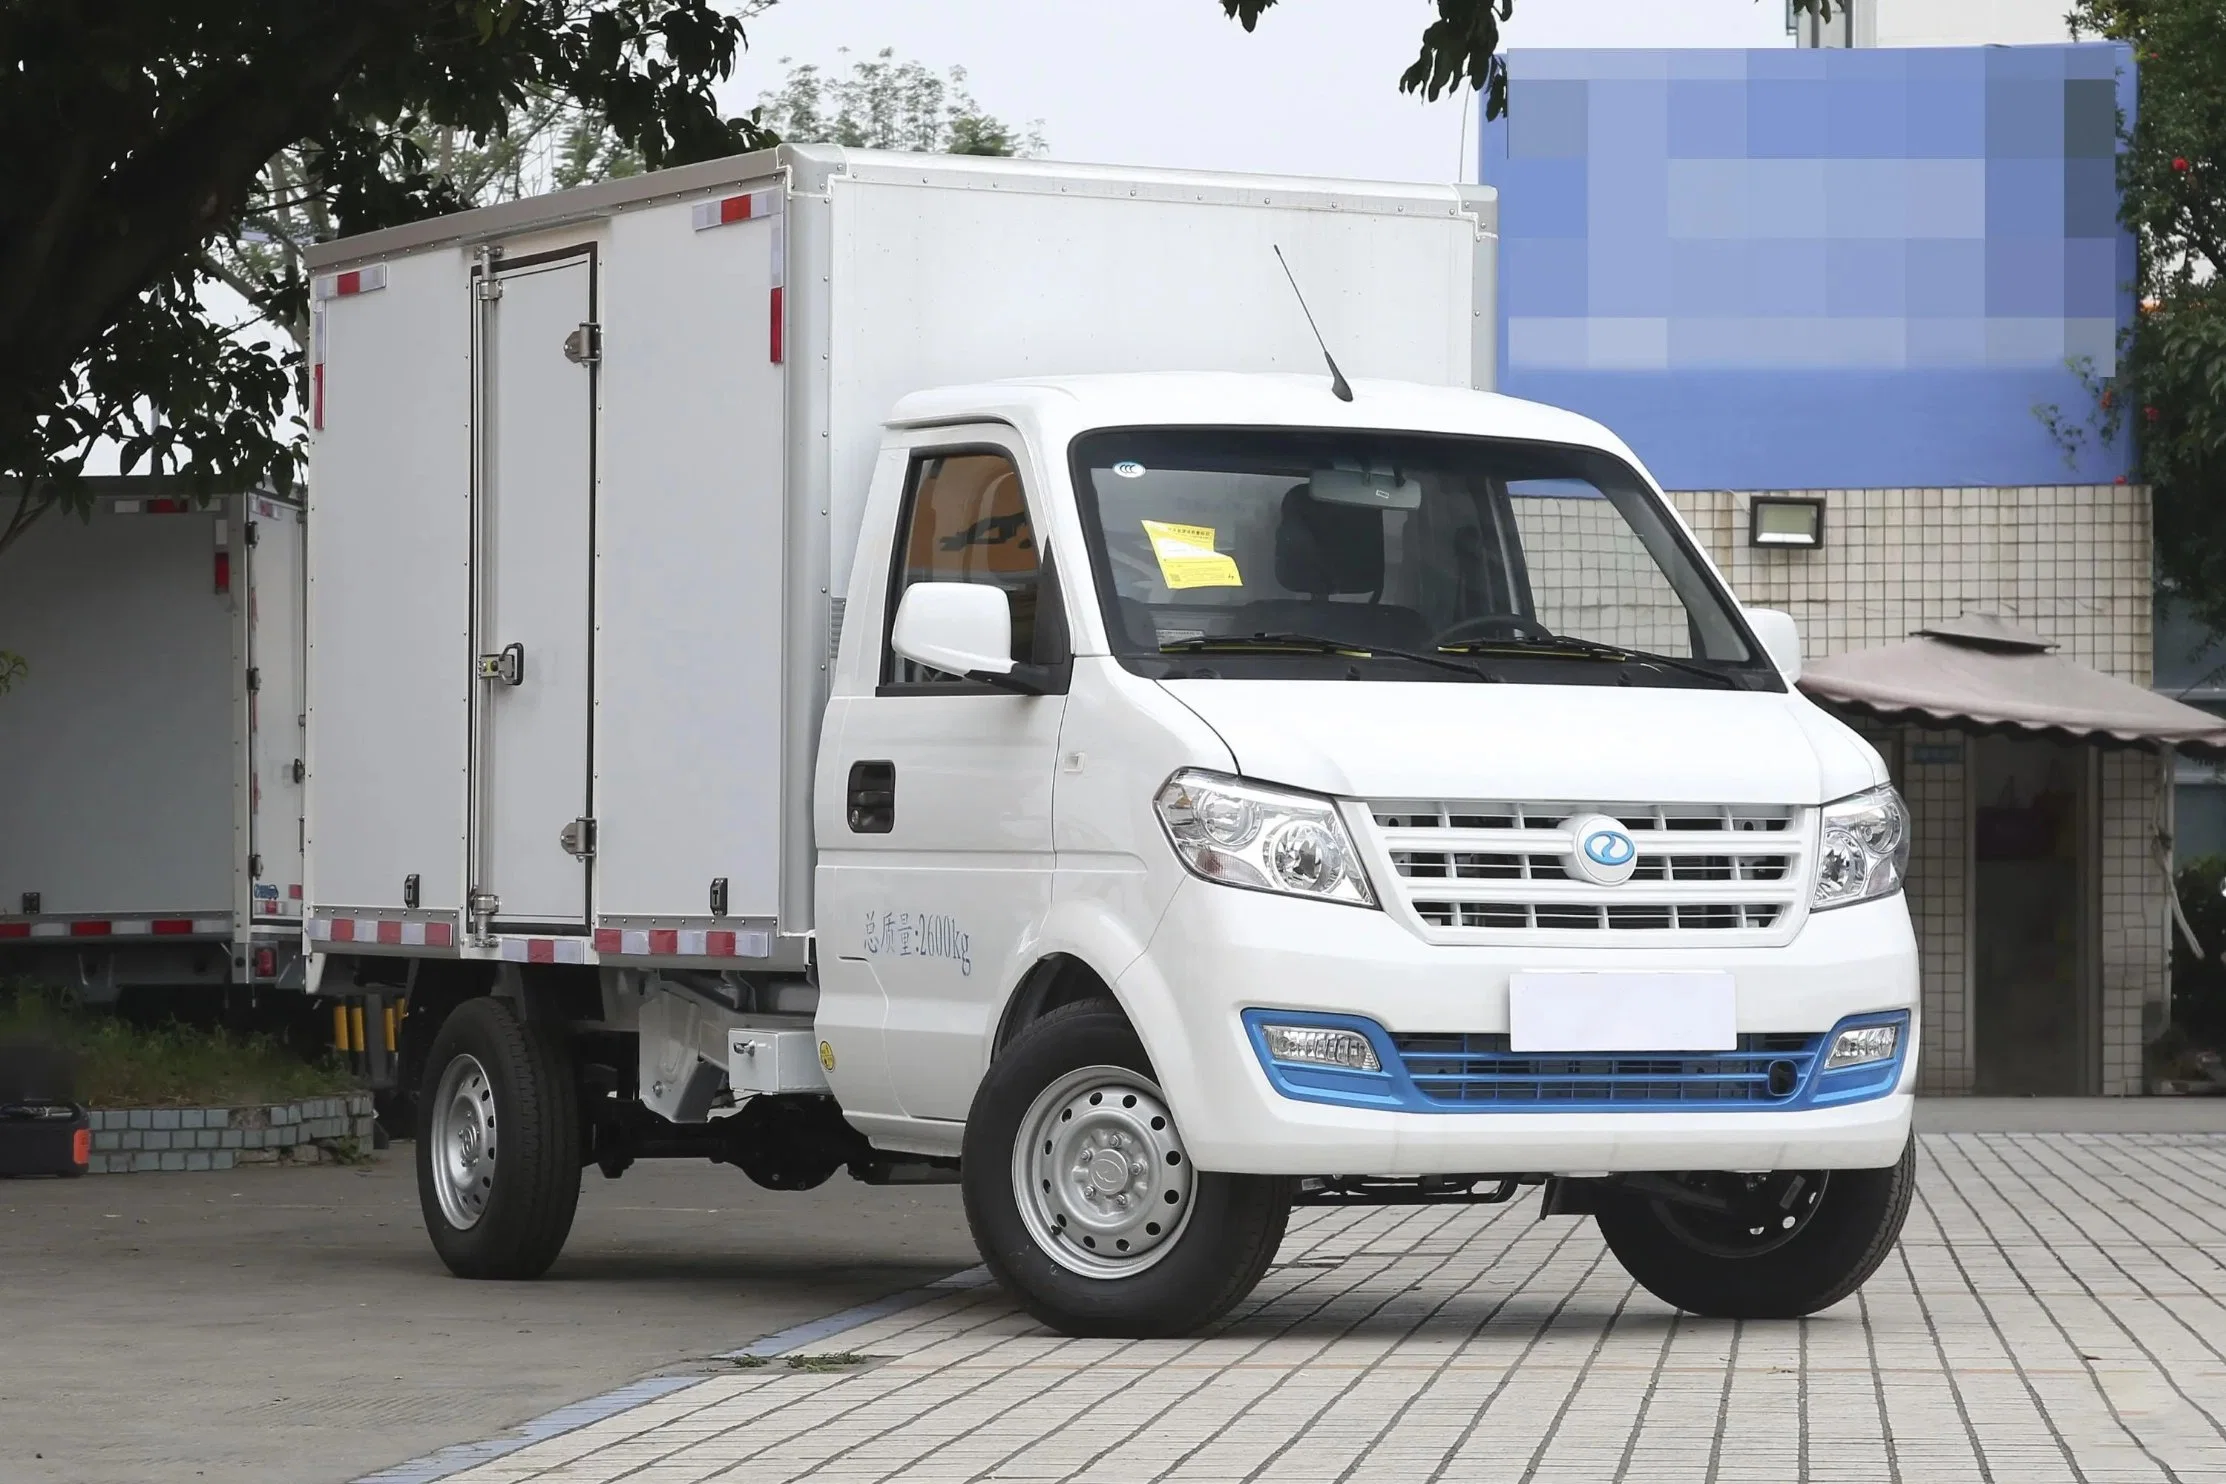 Ruichi 2023 Ec31 Standard Edition 39.42kwh 300 Km Each Charging Refrigerated/Cargo Box/Flat -Flat Large Electric Truck Electric Car